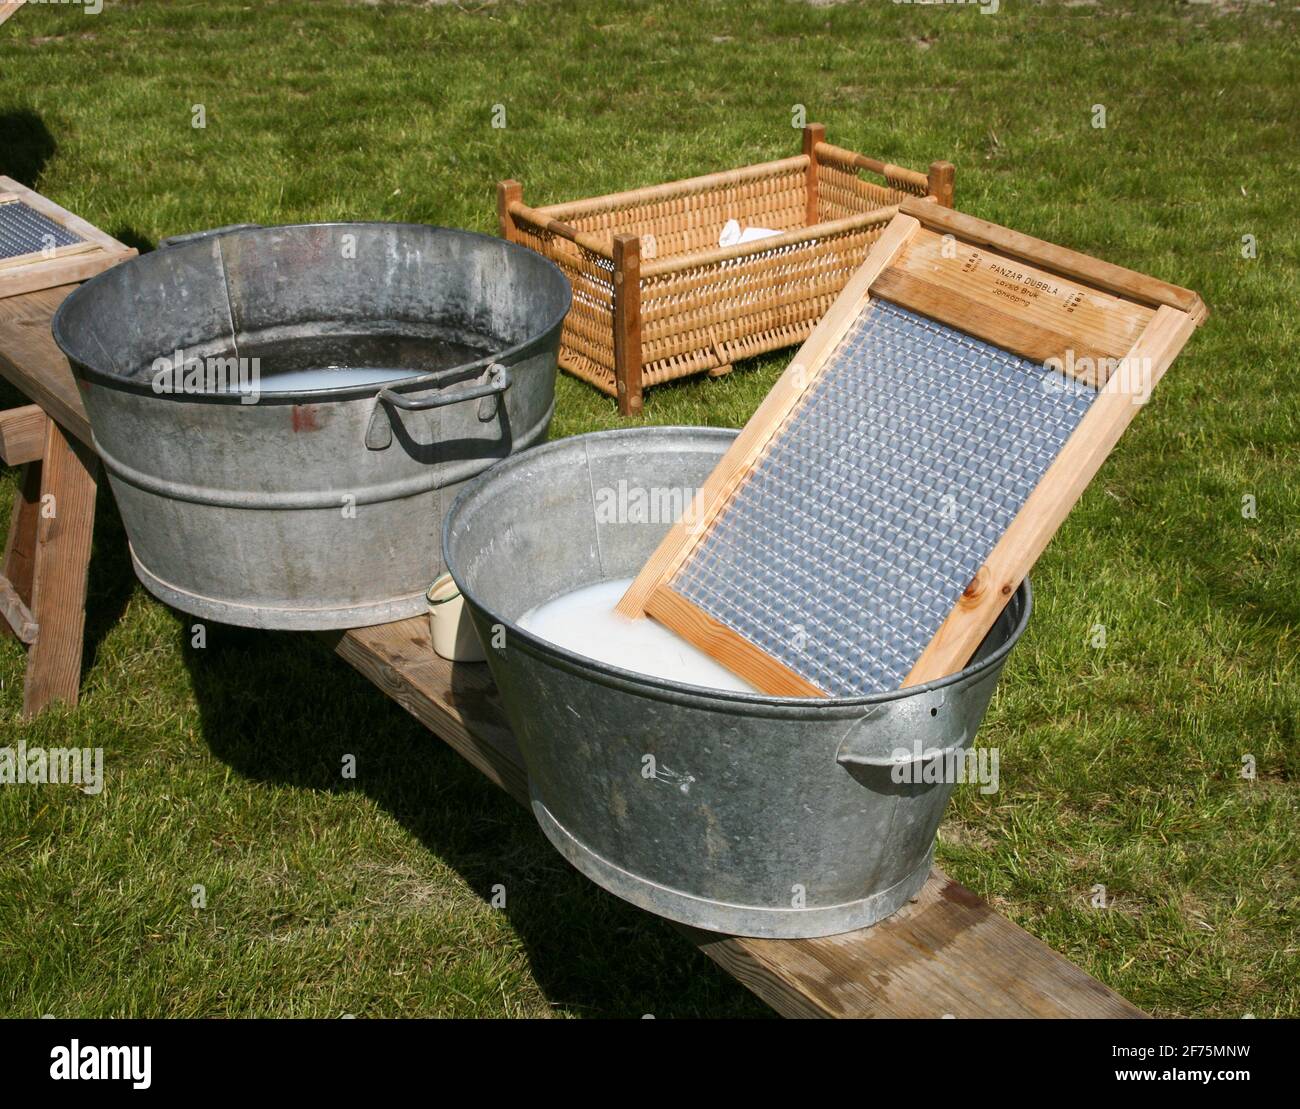 https://c8.alamy.com/comp/2F75MNW/laundry-wash-outdoor-in-the-country-in-wash-sink-basin-and-with-washboards-to-remove-dirt-2F75MNW.jpg